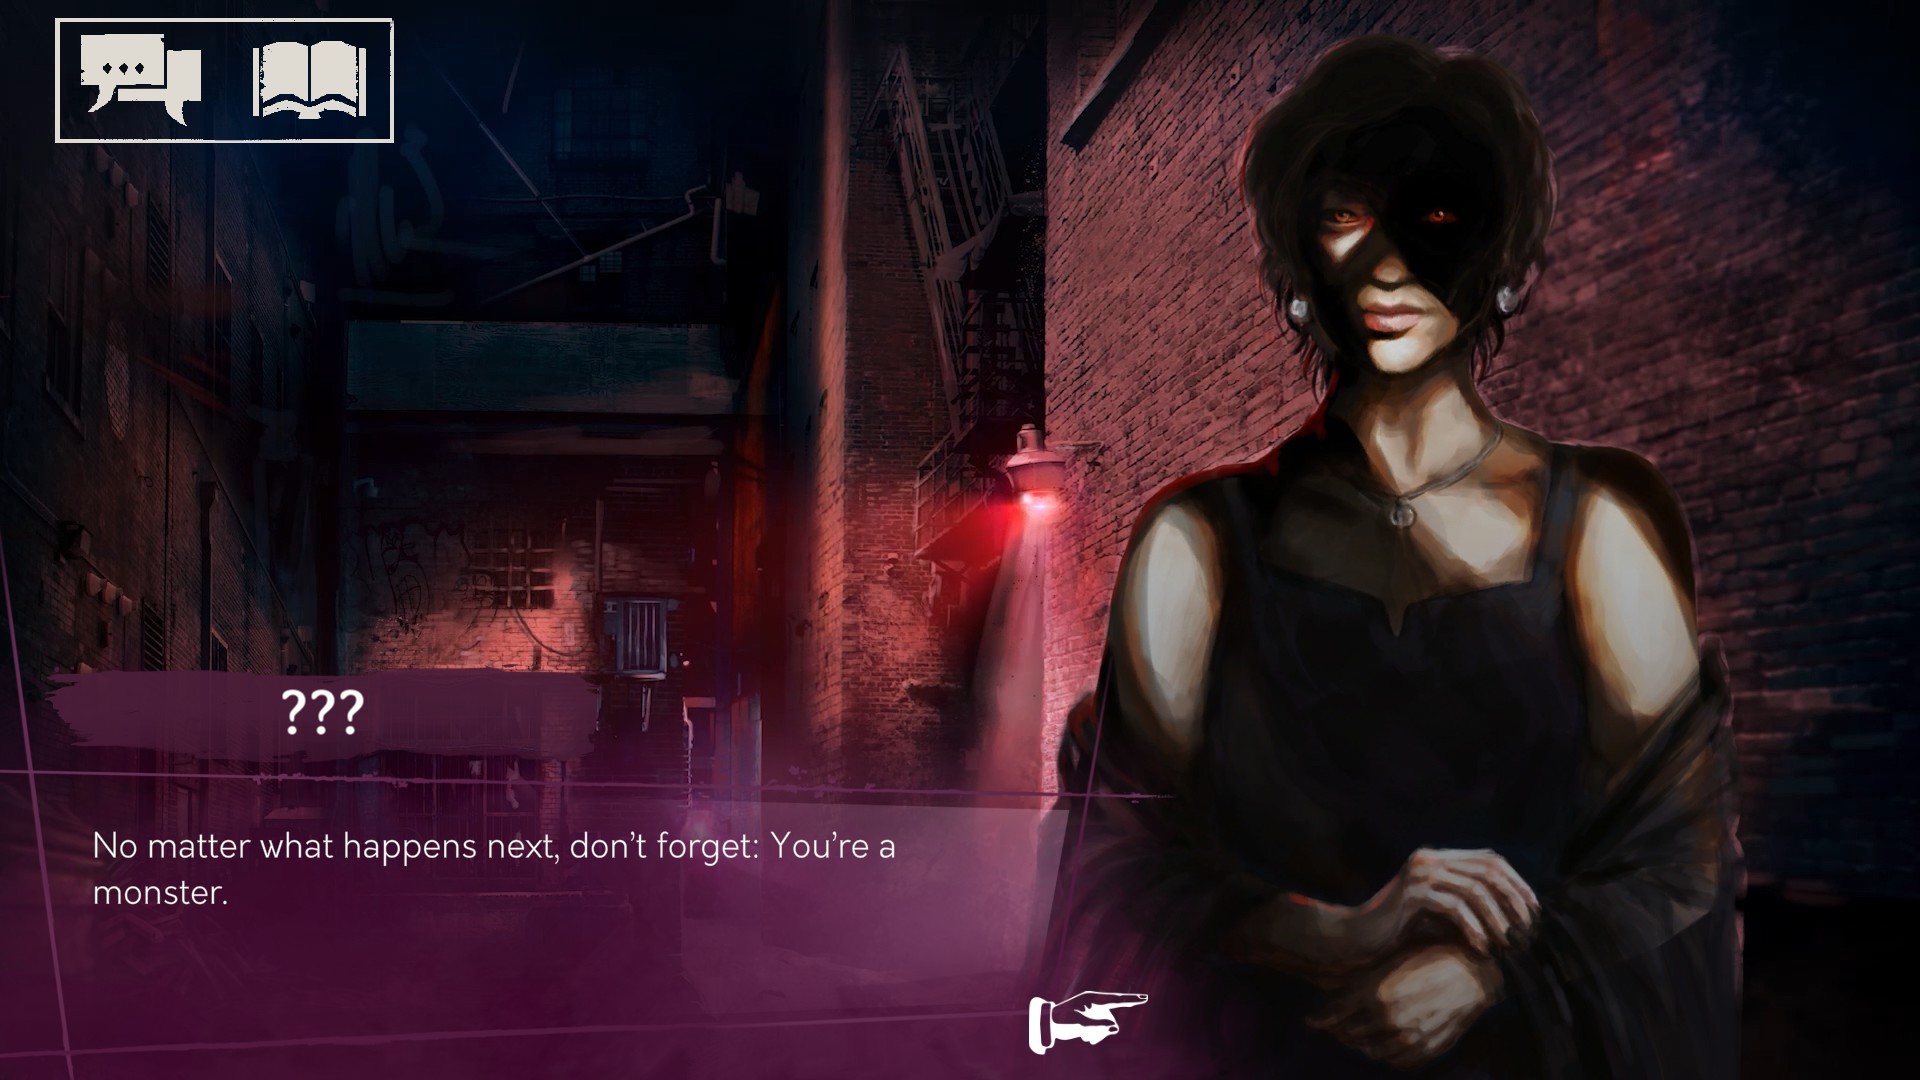 Vampire the Masquerade  A Step Into the Darkness 